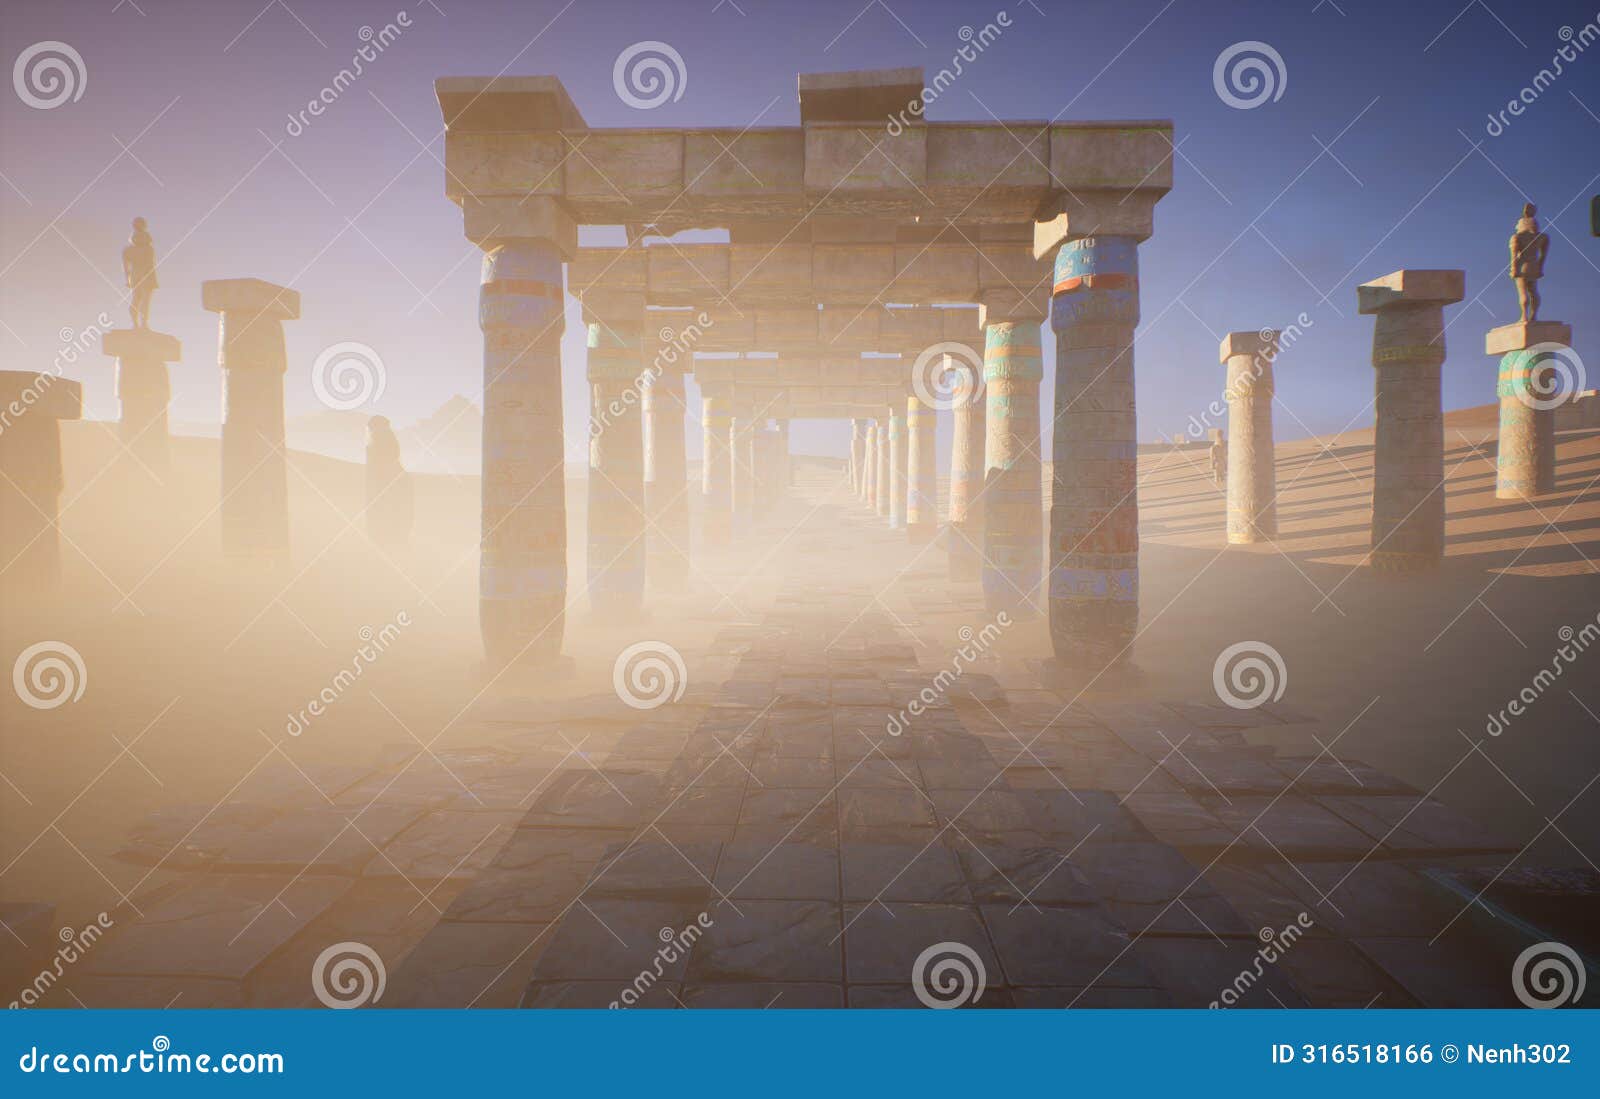 3d rendered background image of a cinematic fantasy egyptian temple in the desert